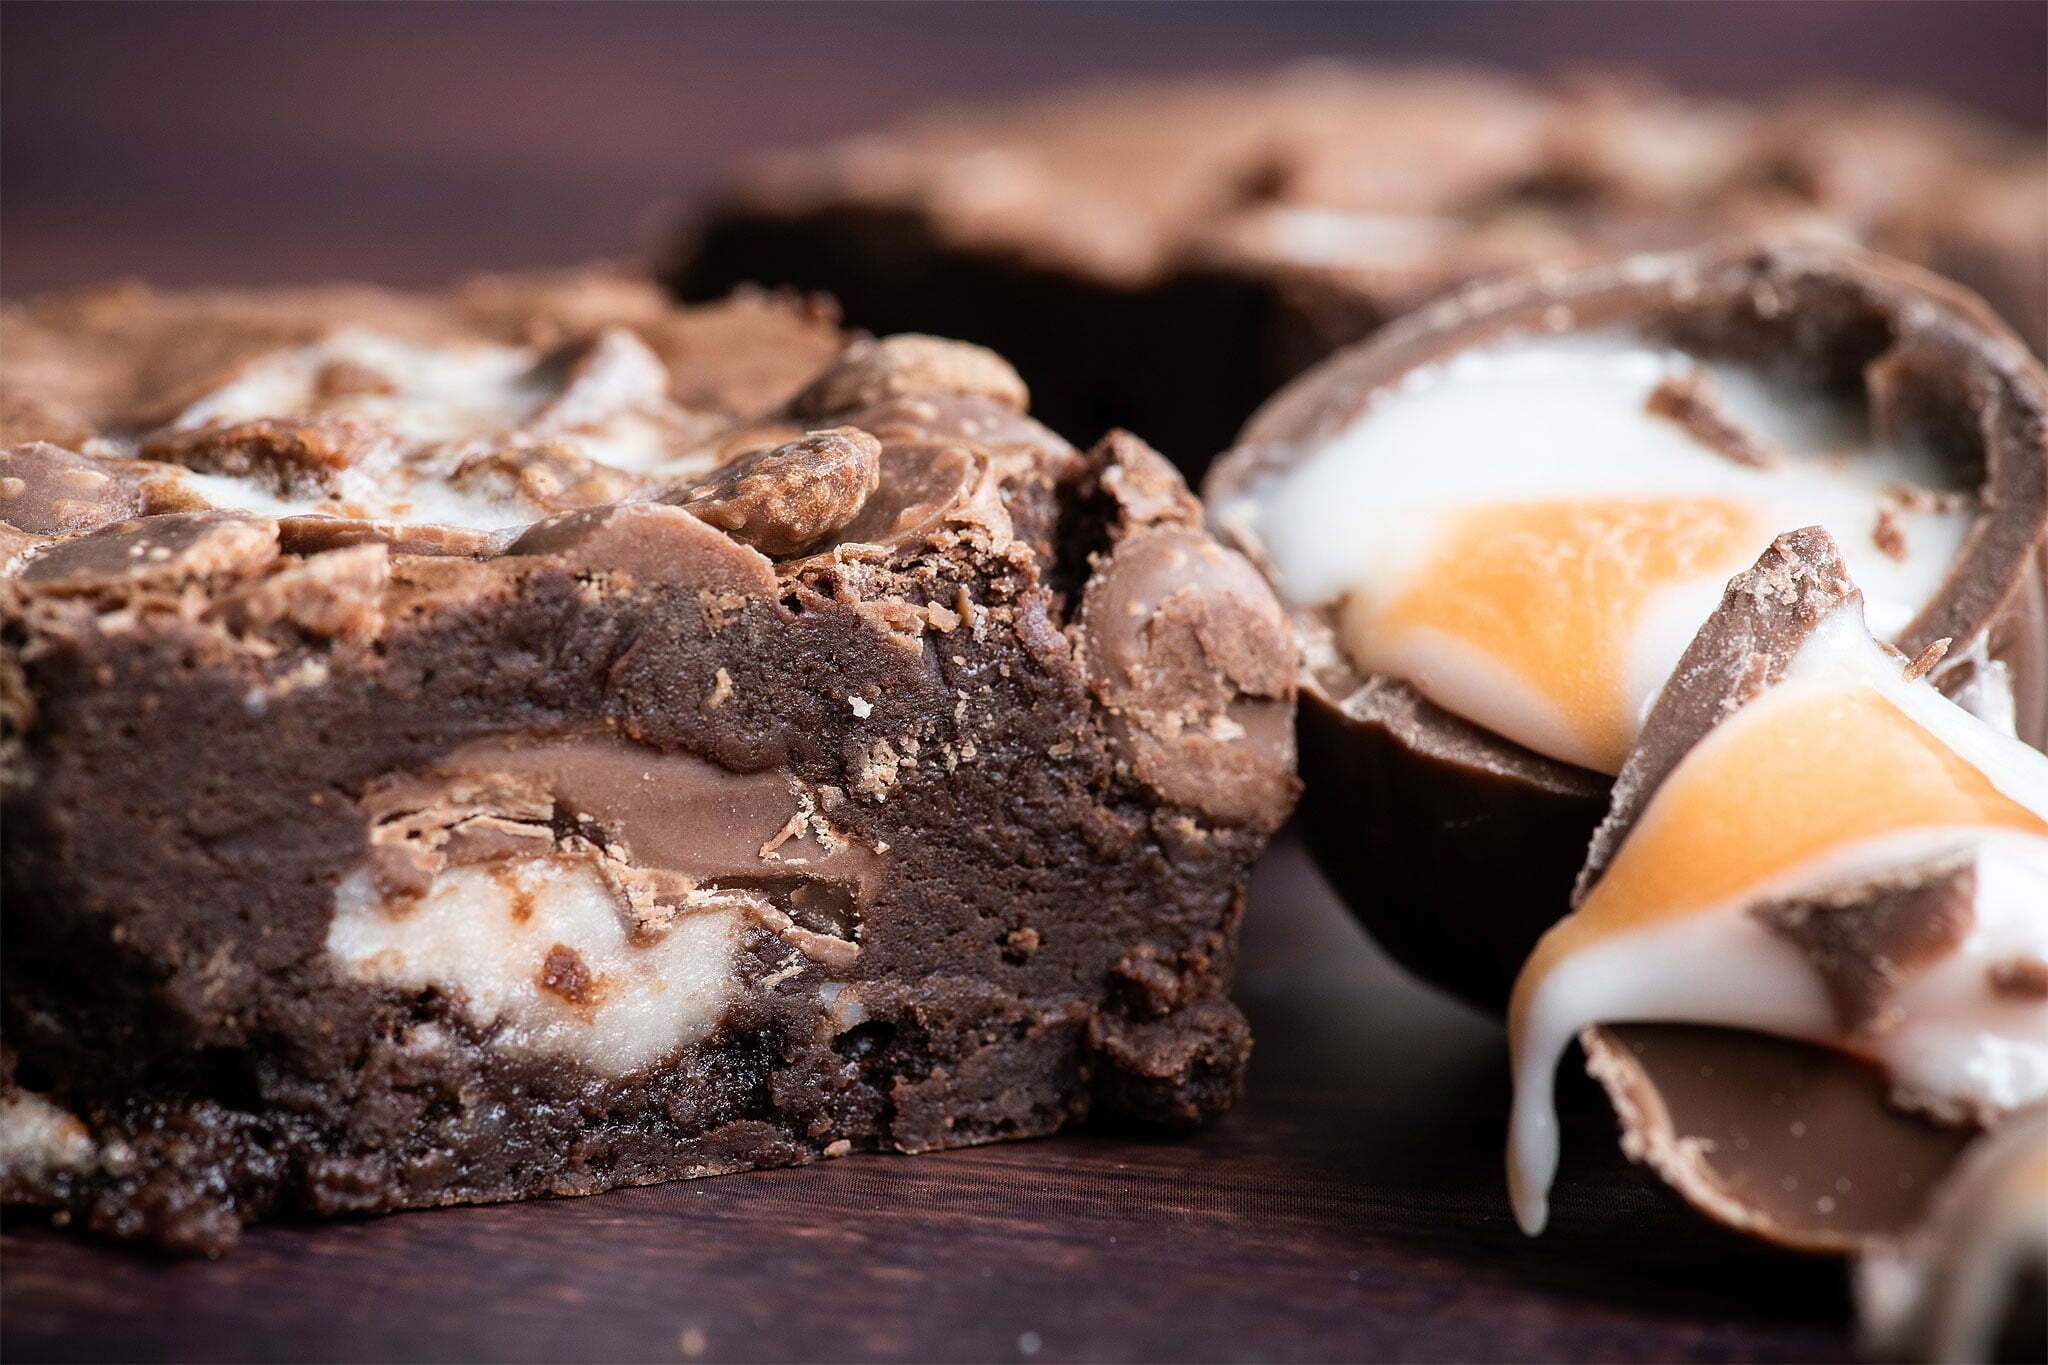 Our Creme Egg Brownie is part of our Easter brownie gifting box. The creme egg brownie is on the left and the Creme Eggs are on the right of the image, cut in two so you can see the egg yolk and egg white fondant icing.